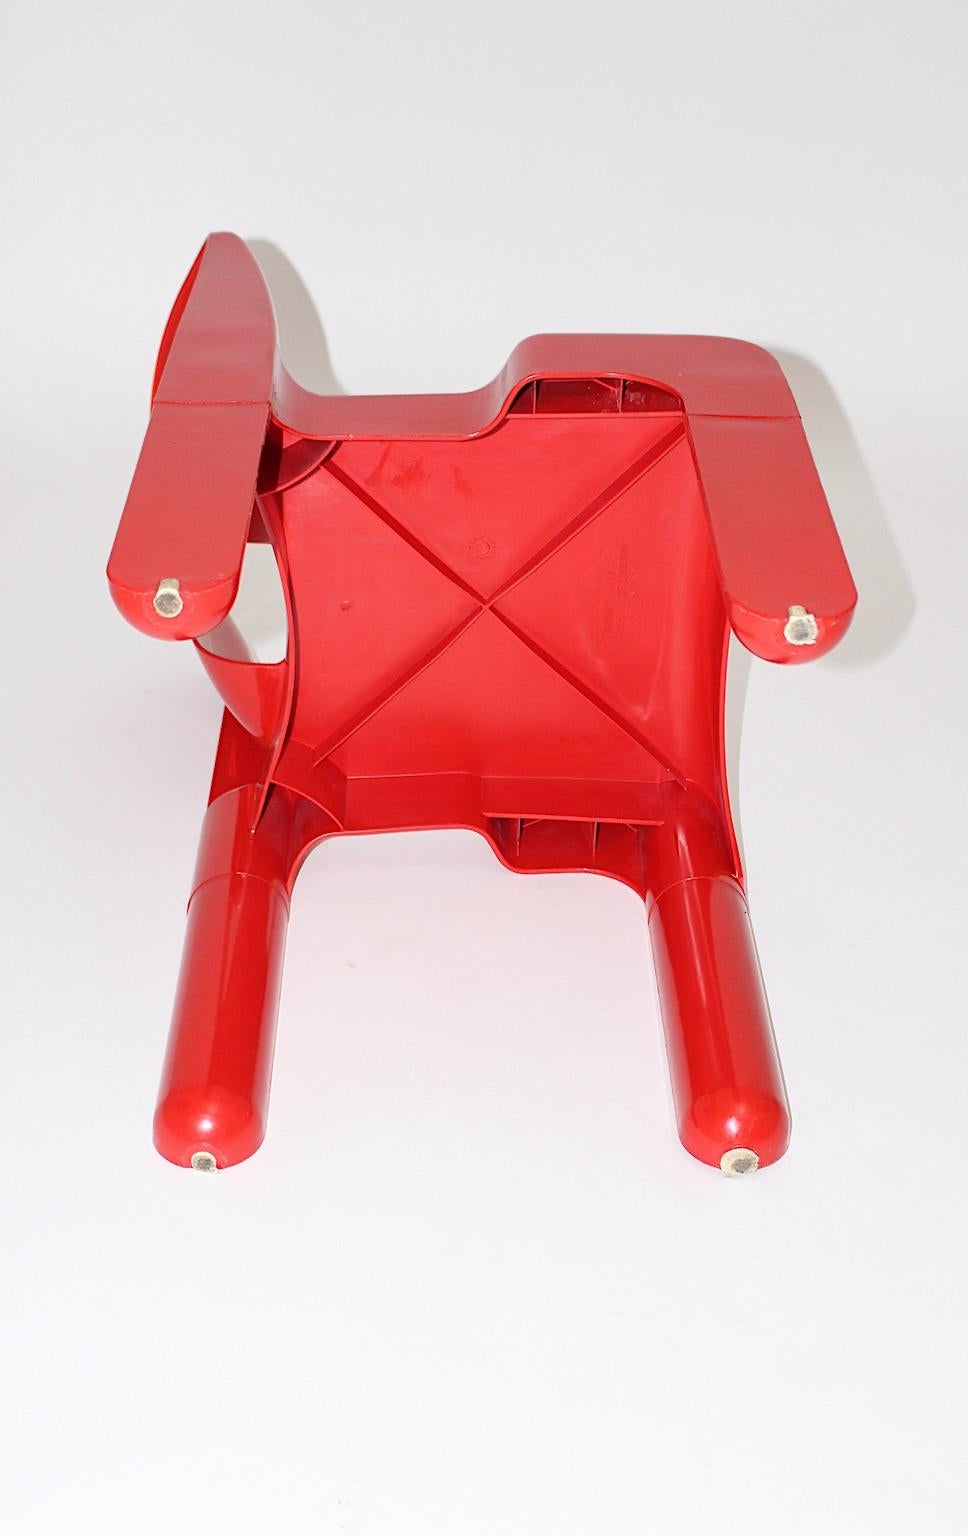 Joe Colombo Space Age Pop Design Red Vintage Plastic Chair 1968 Italy Universale 2